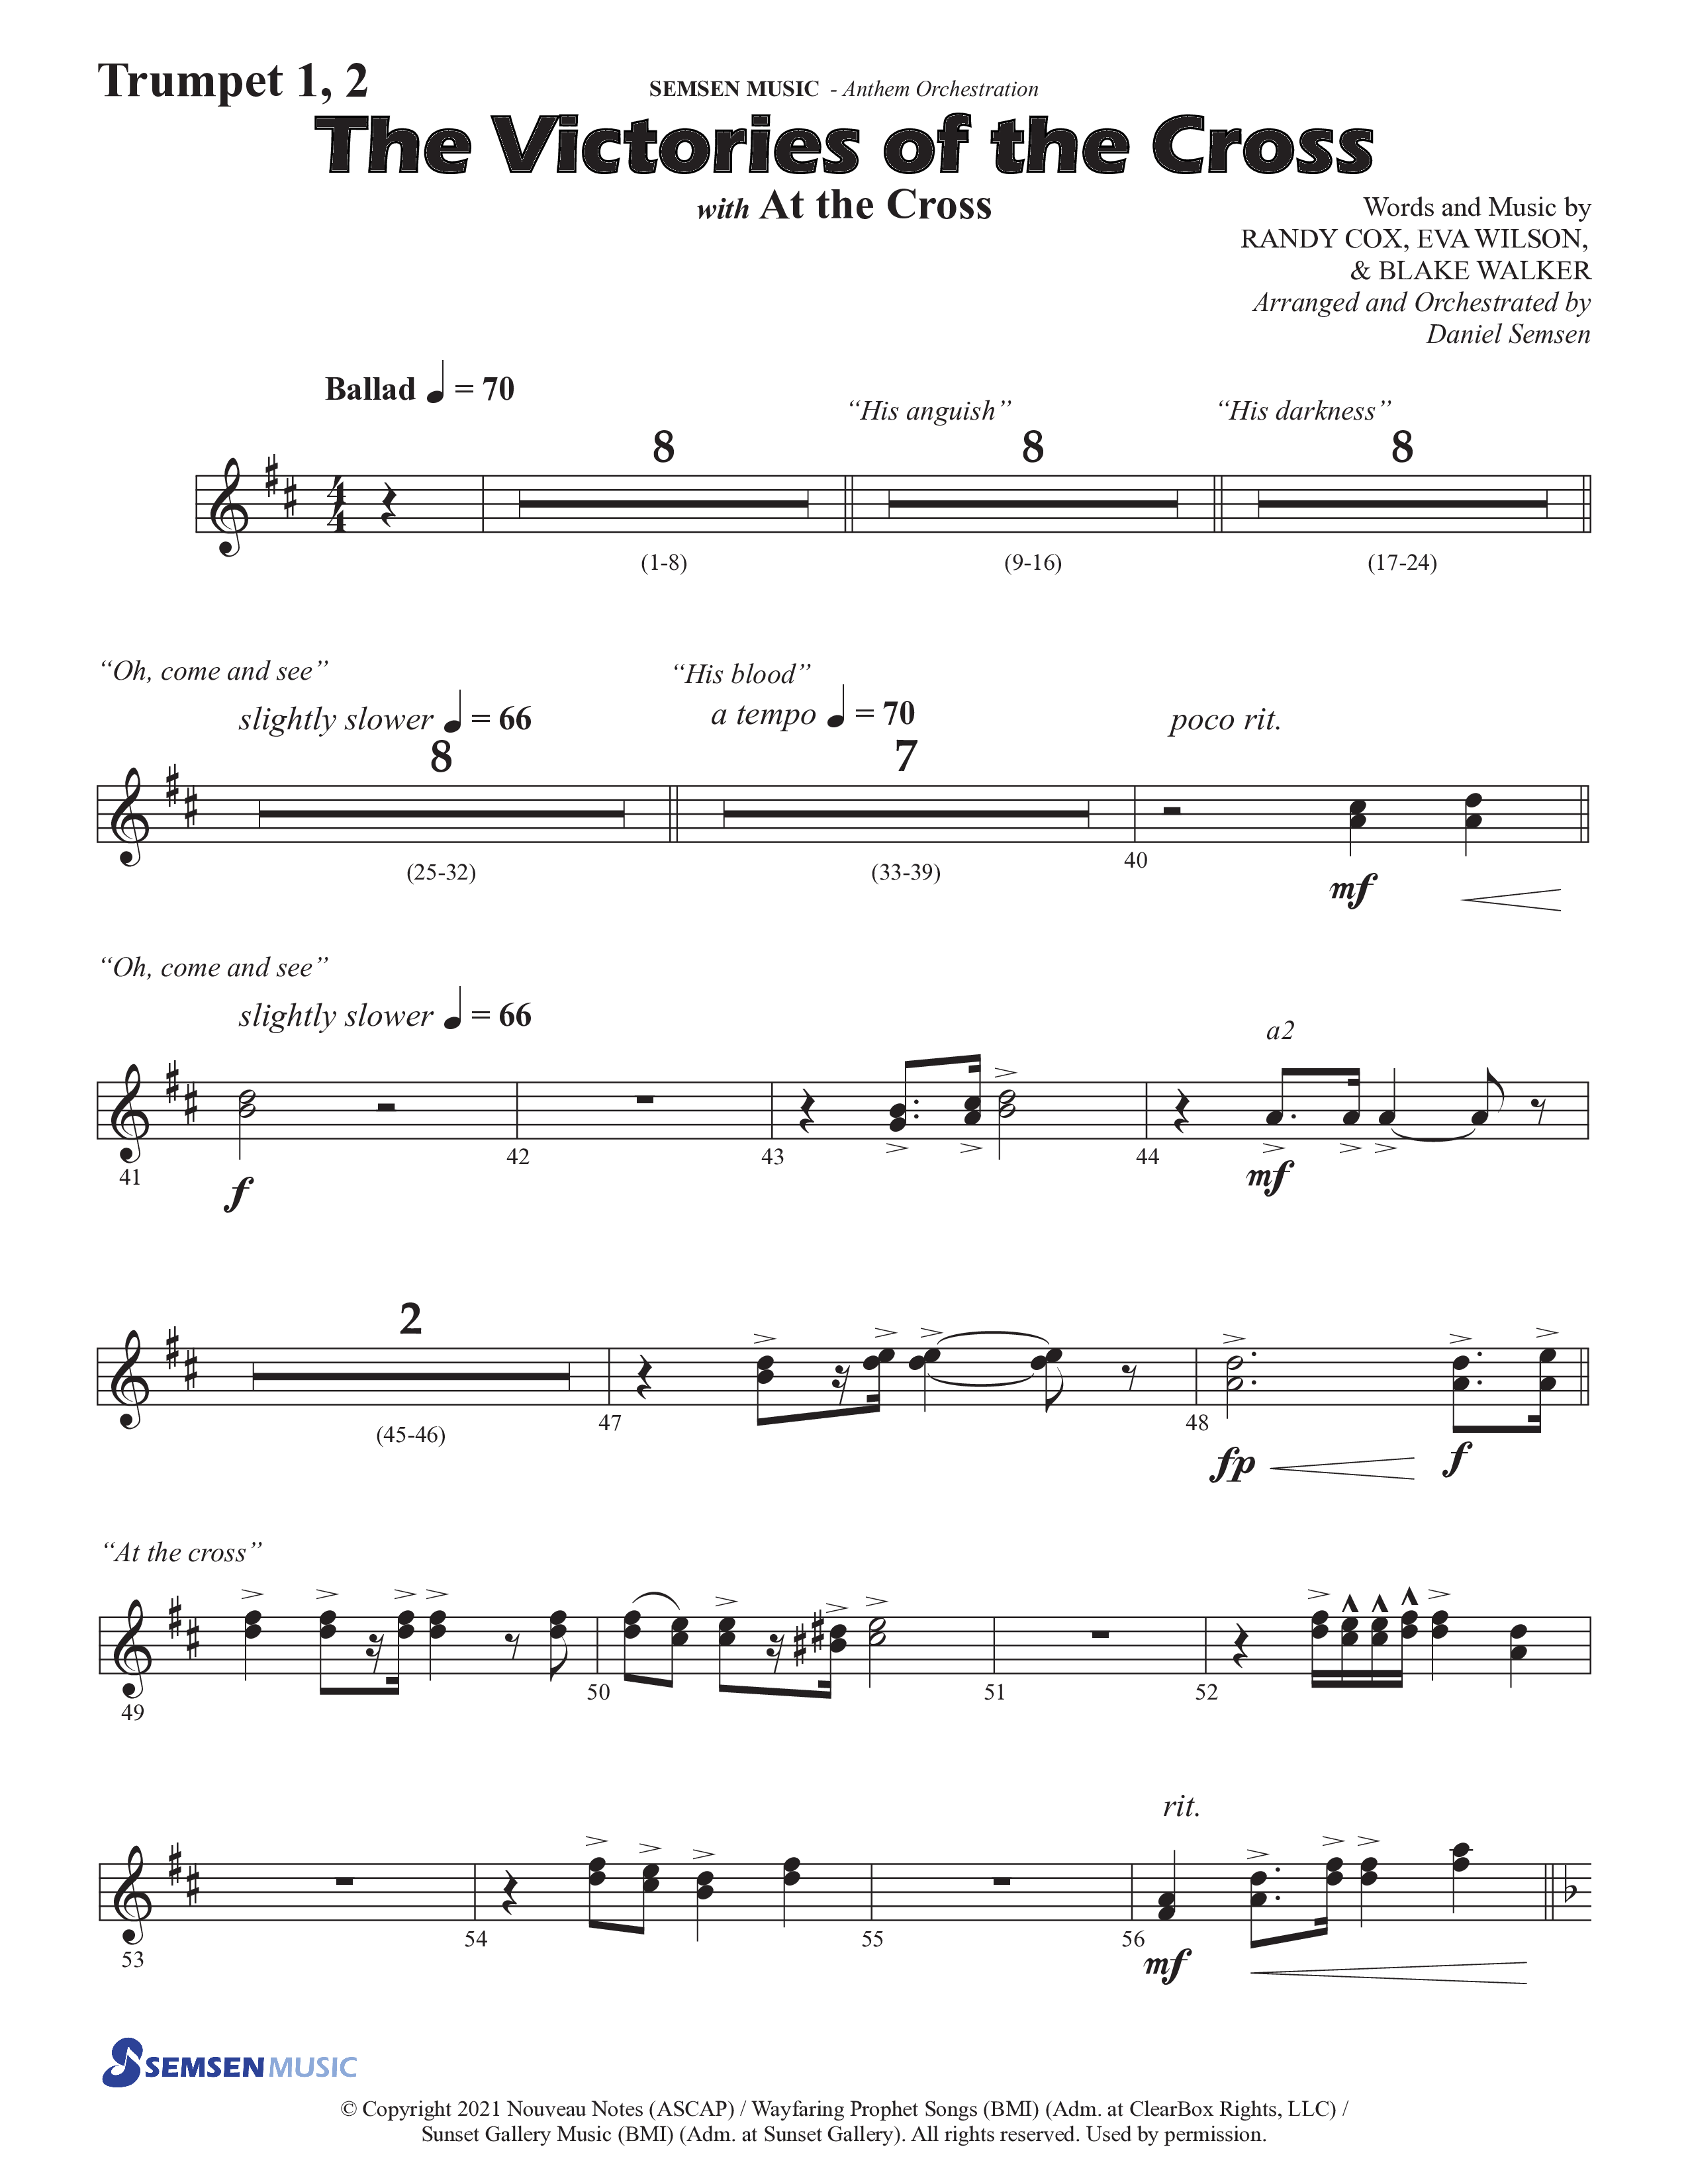 The Victories Of The Cross (with At The Cross) (Choral Anthem SATB) Trumpet 1,2 (Semsen Music / Arr. Daniel Semsen)